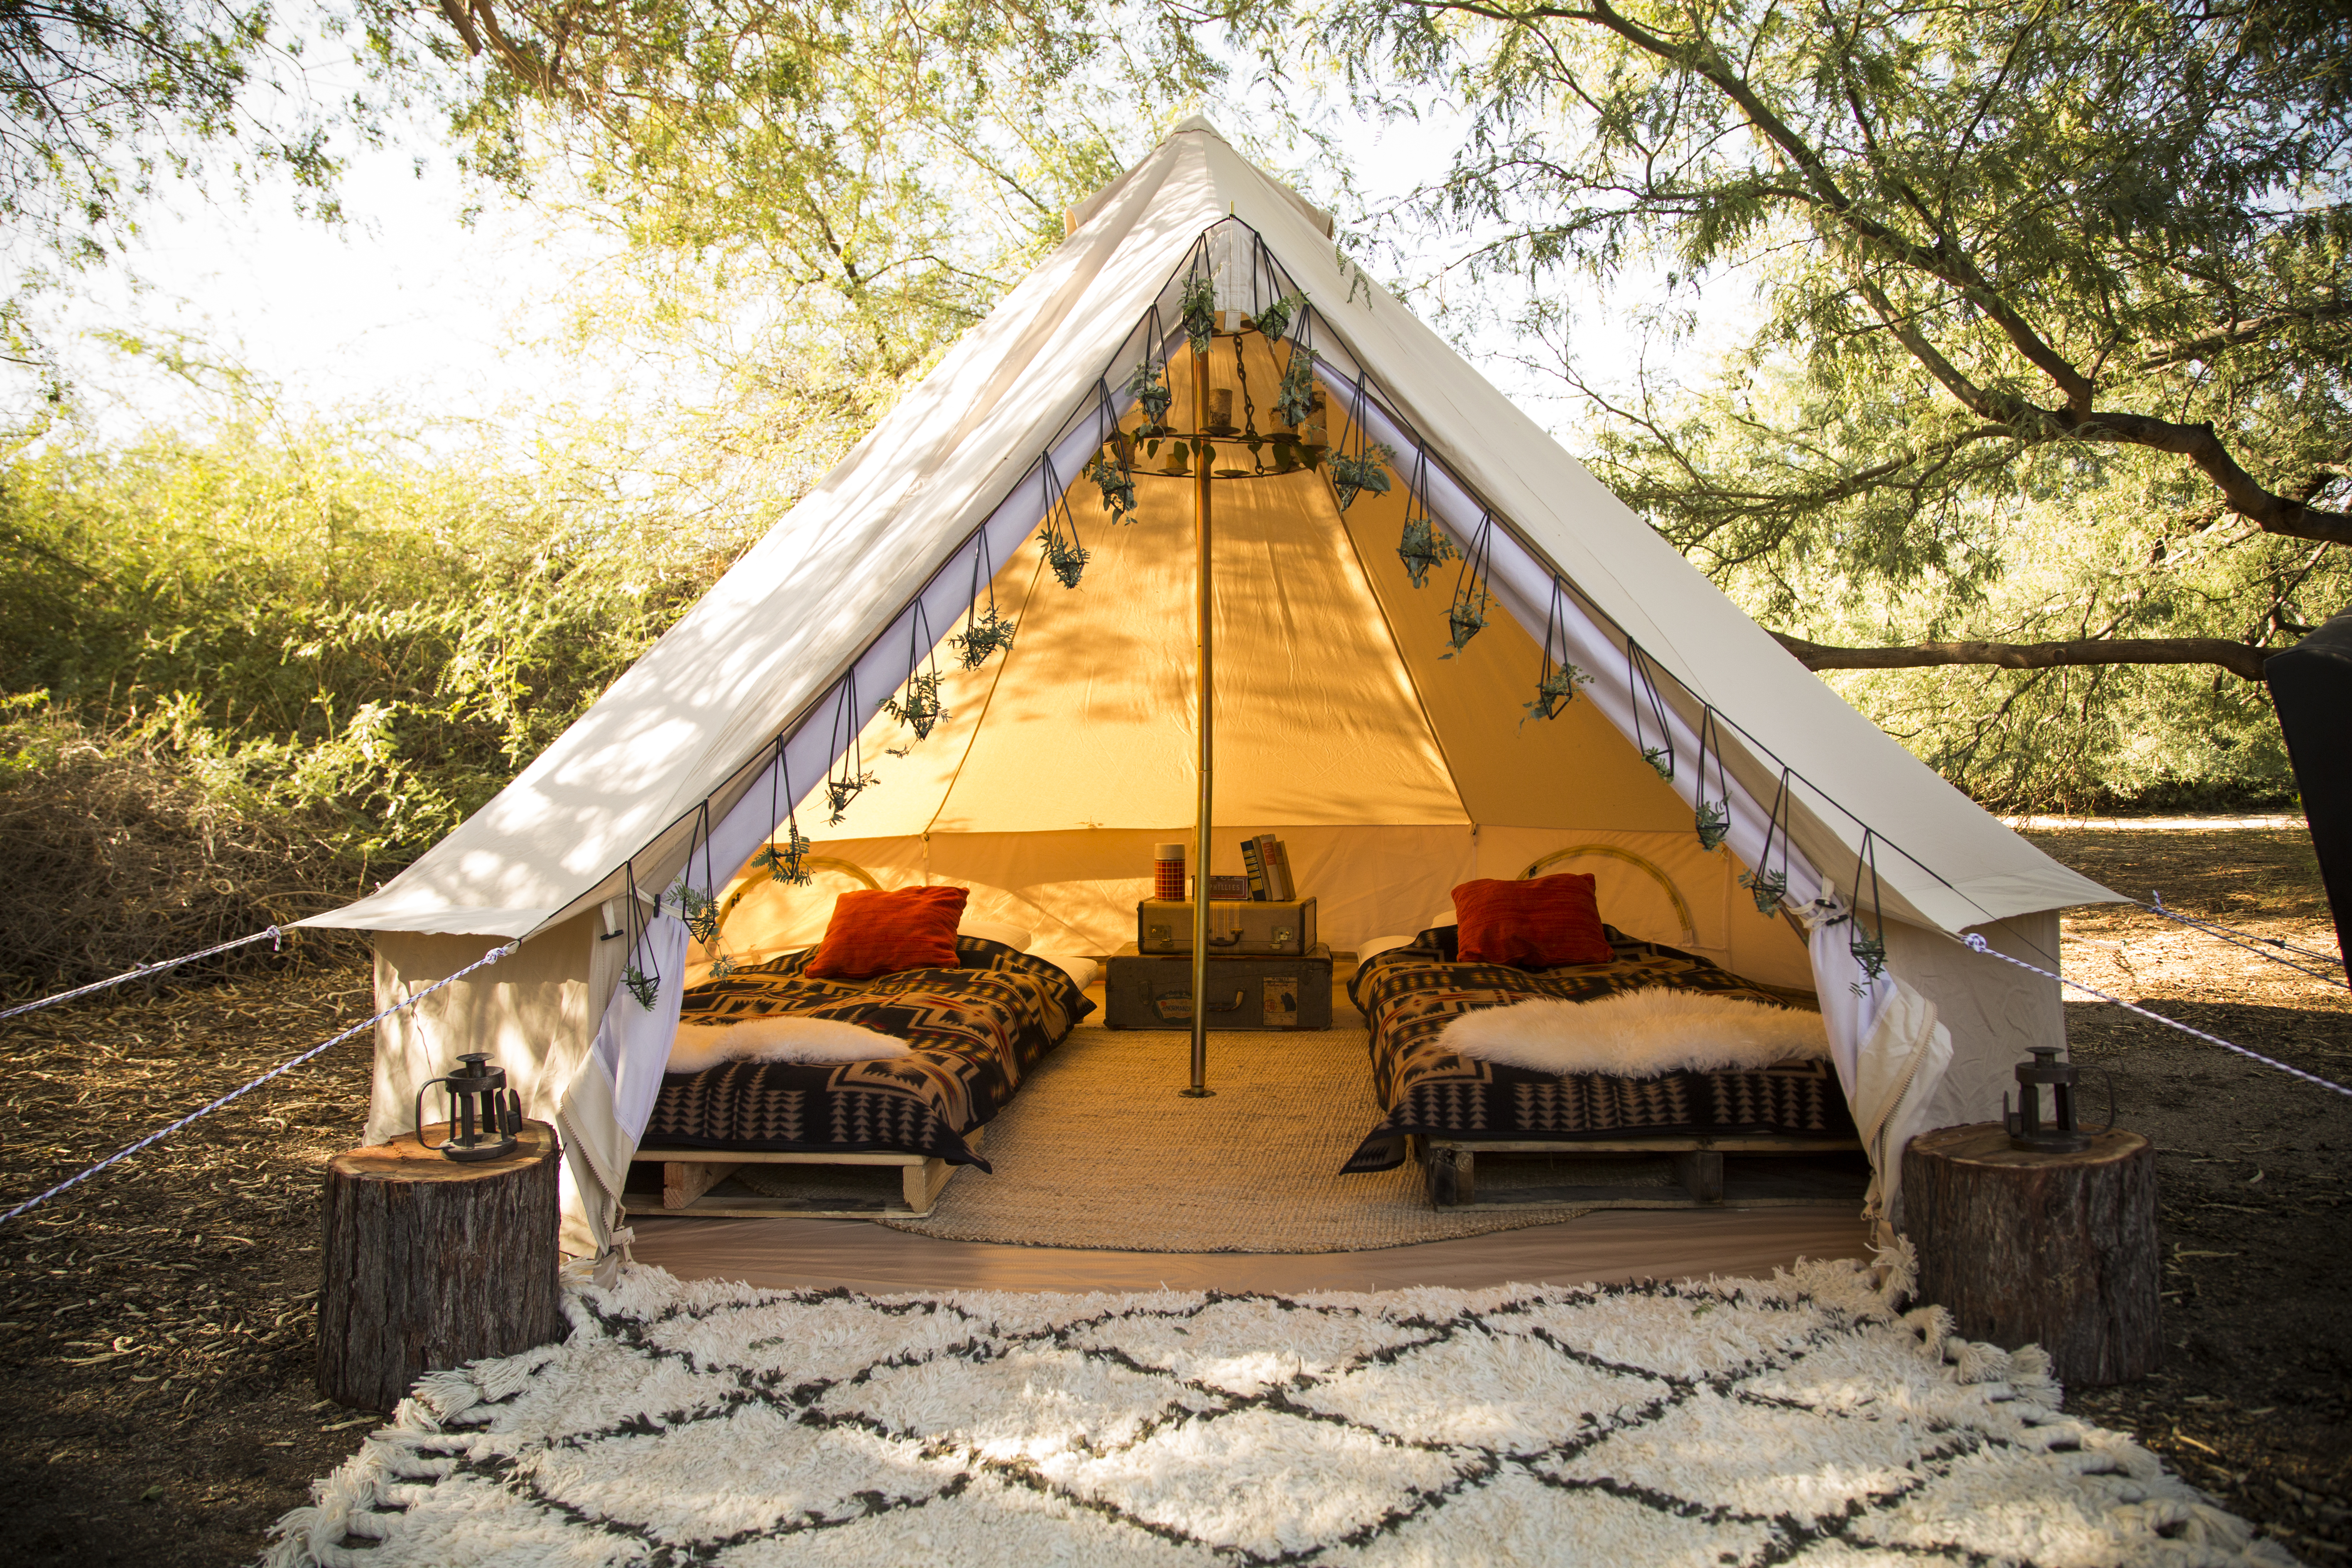 Where Can You Find Luxury Campsites Glamping?